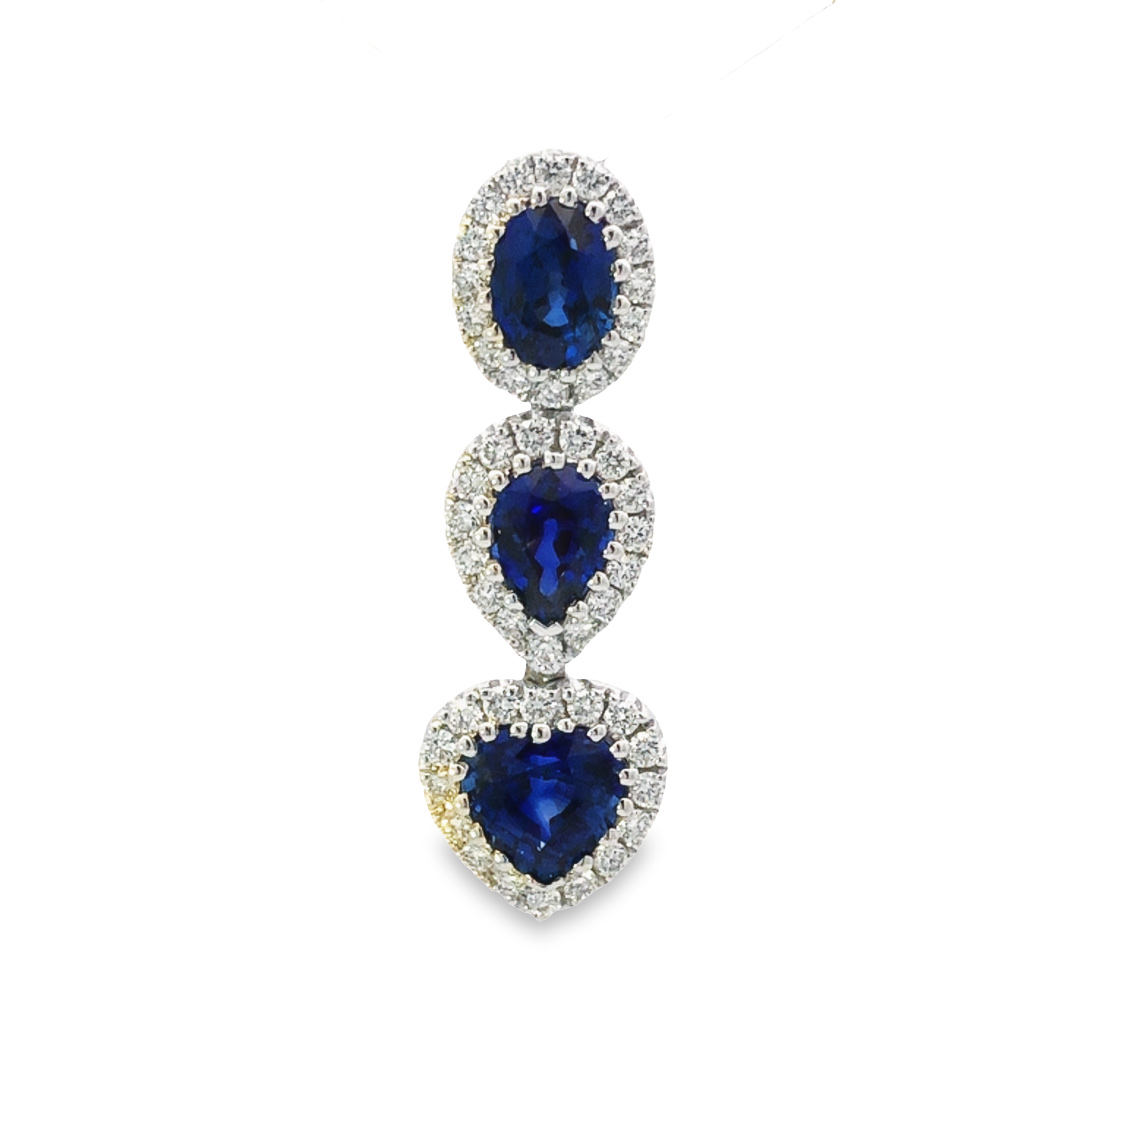 18K White Gold Pendant with 1 Oval Cut Sapphire, 1 Pear Cut Sapphire, and 1 Heart Cut Sapphire